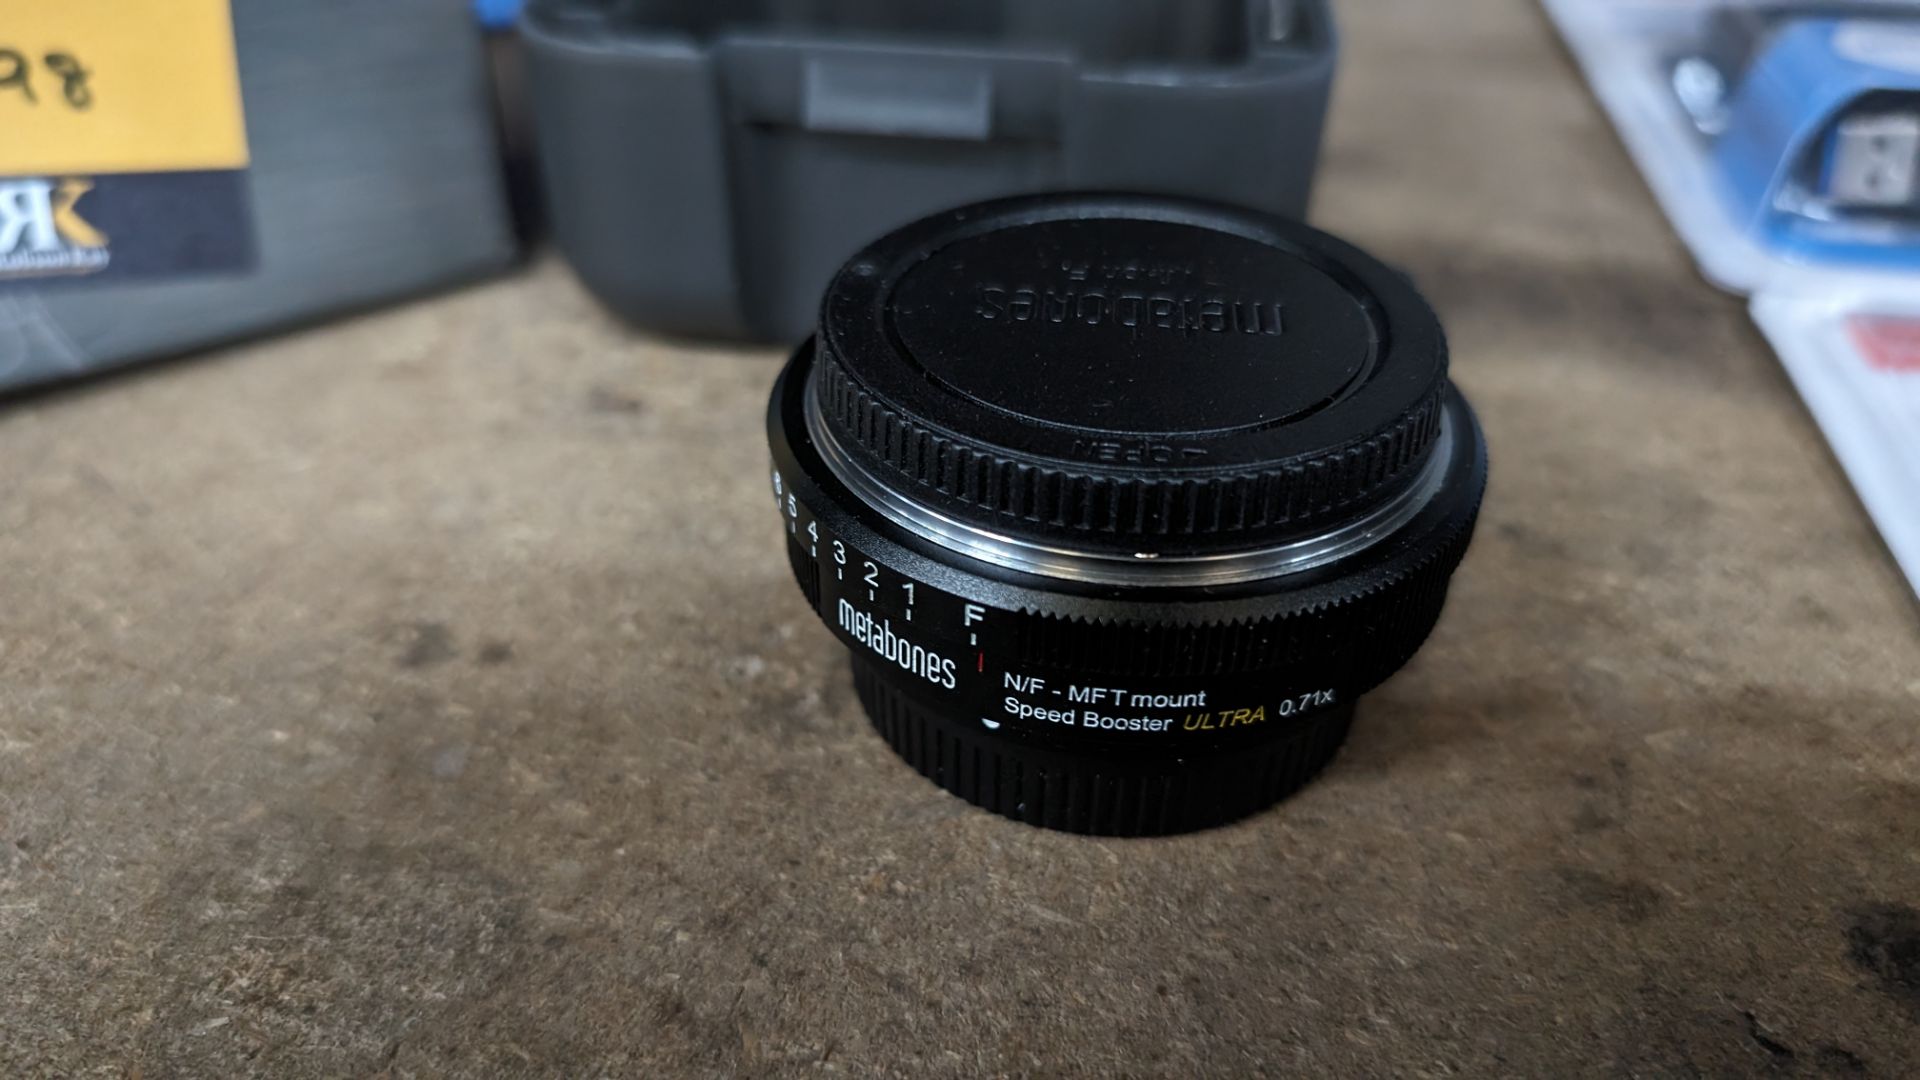 Metabones Professional adaptor ring/speed booster, Nikon G to Microfourthirds Ultra 0.71x - Image 3 of 5